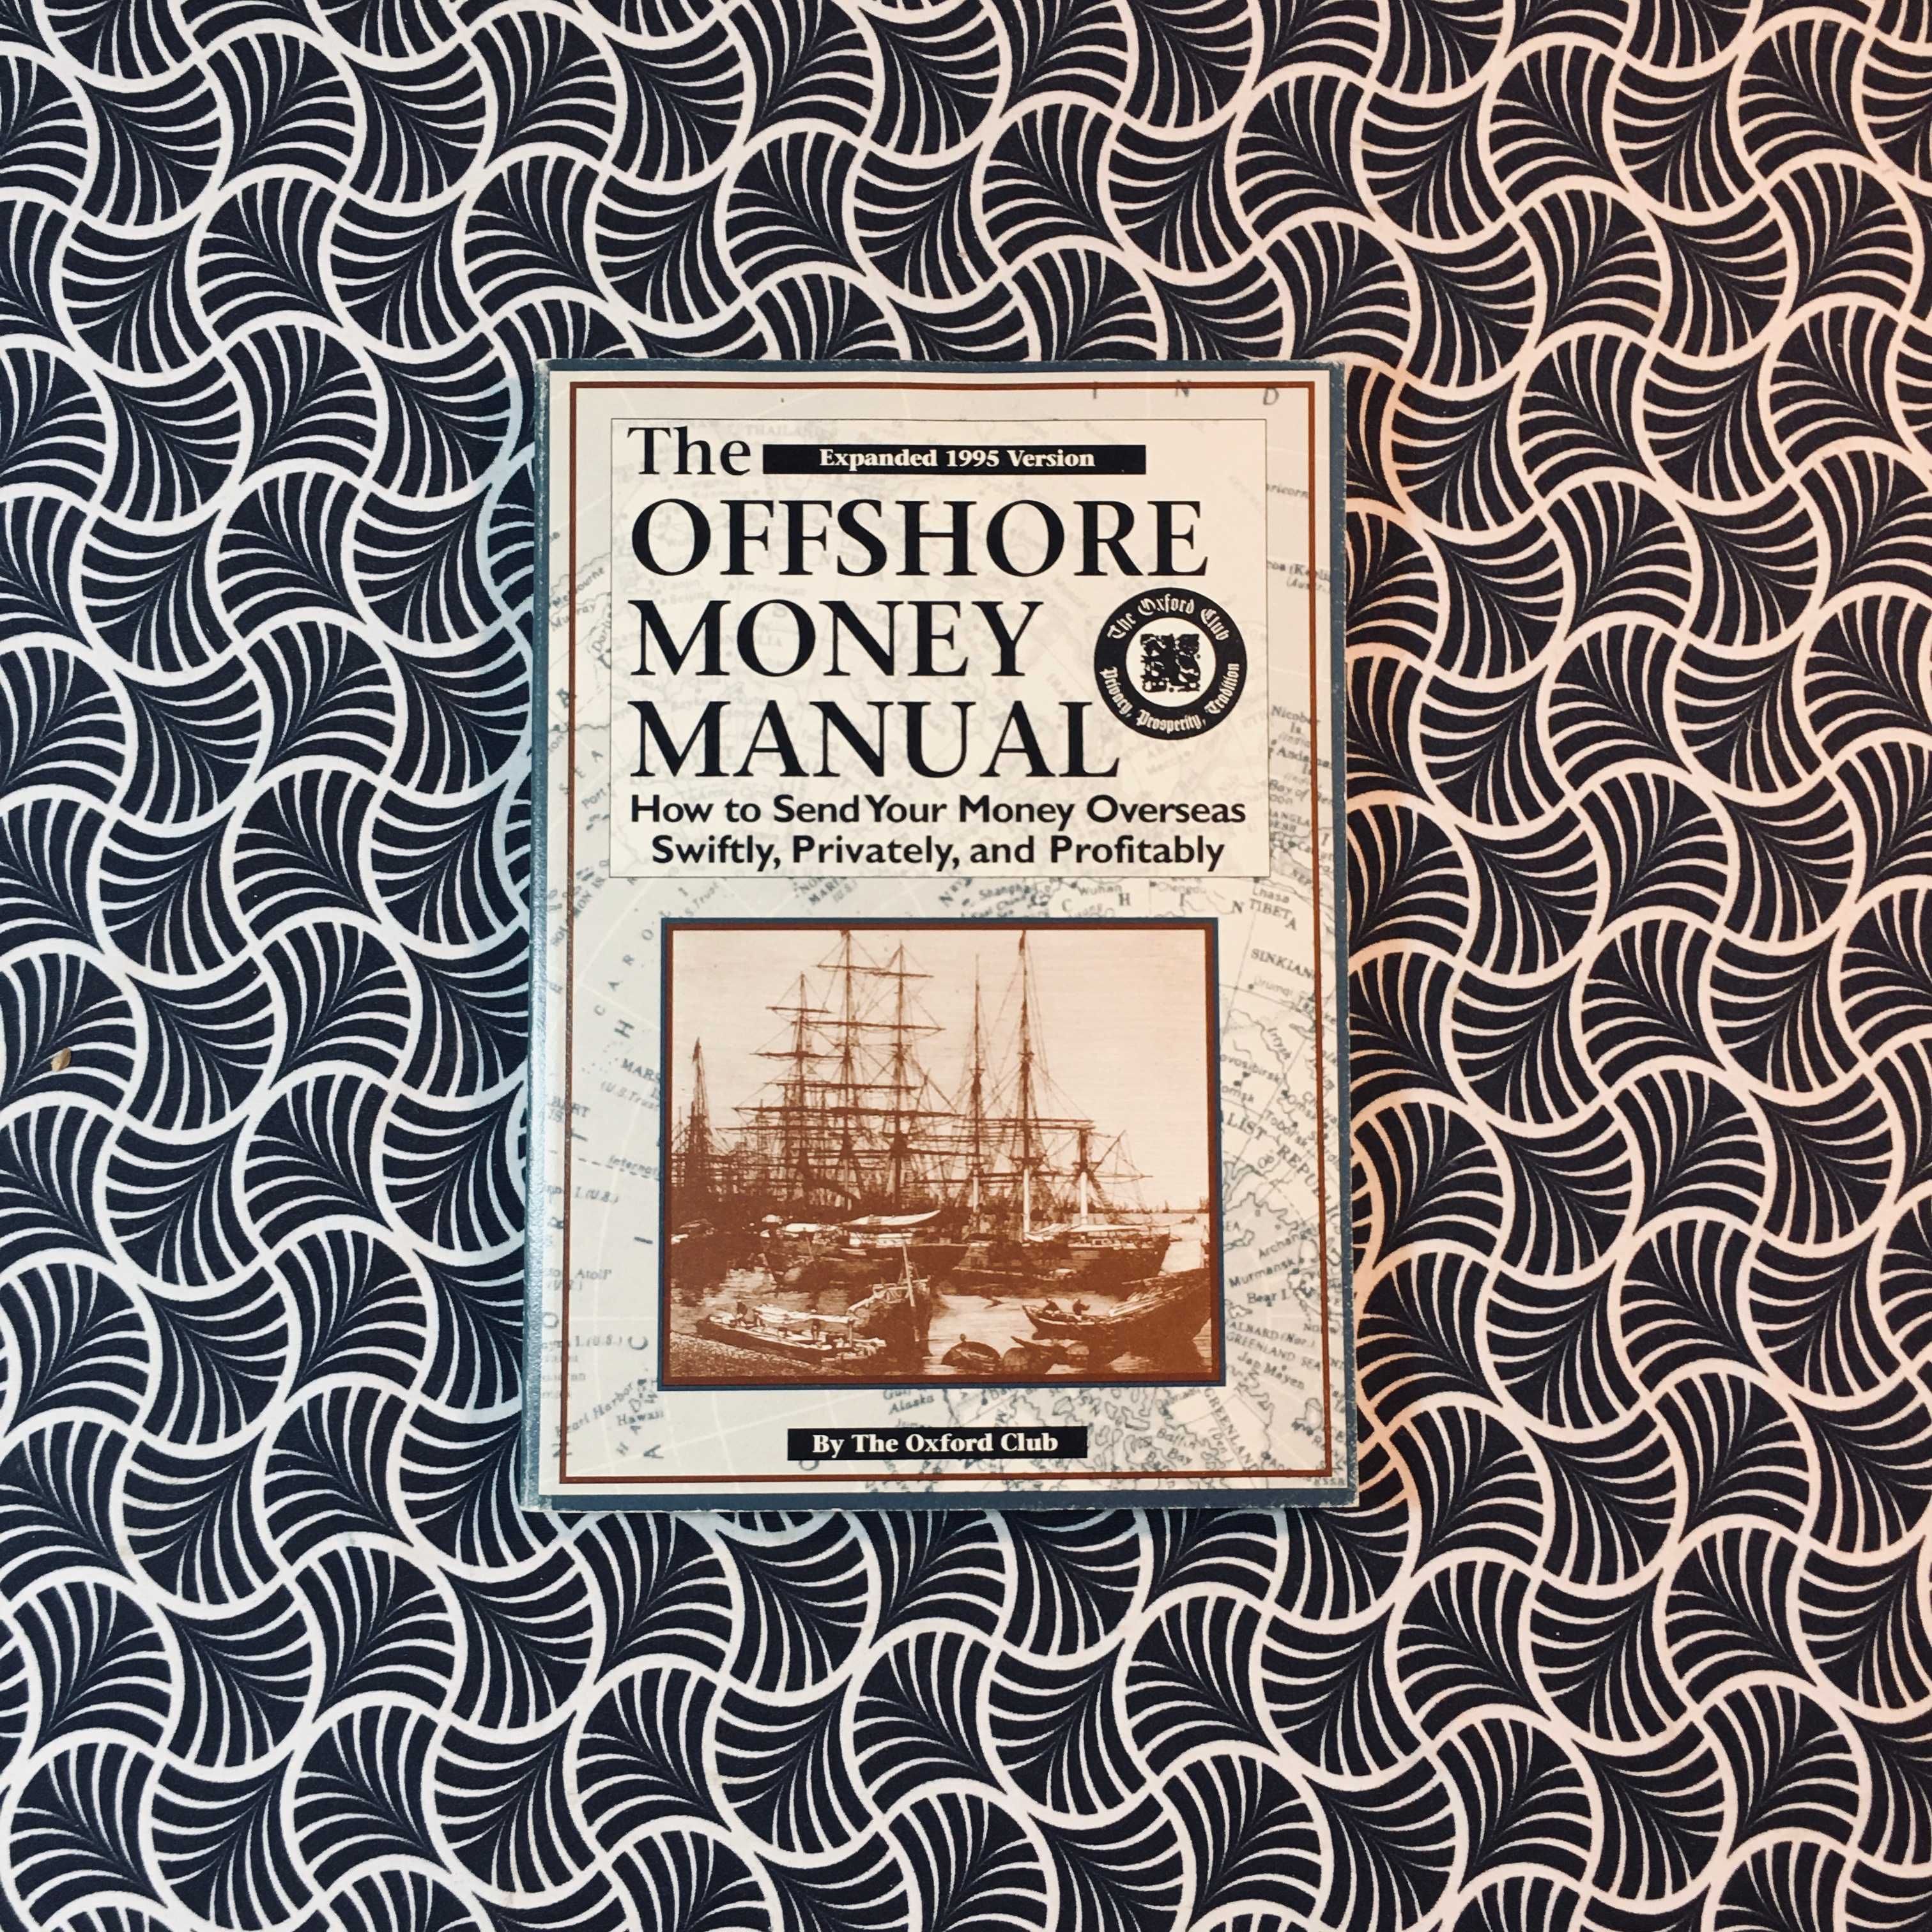 The Offshore Money Manual